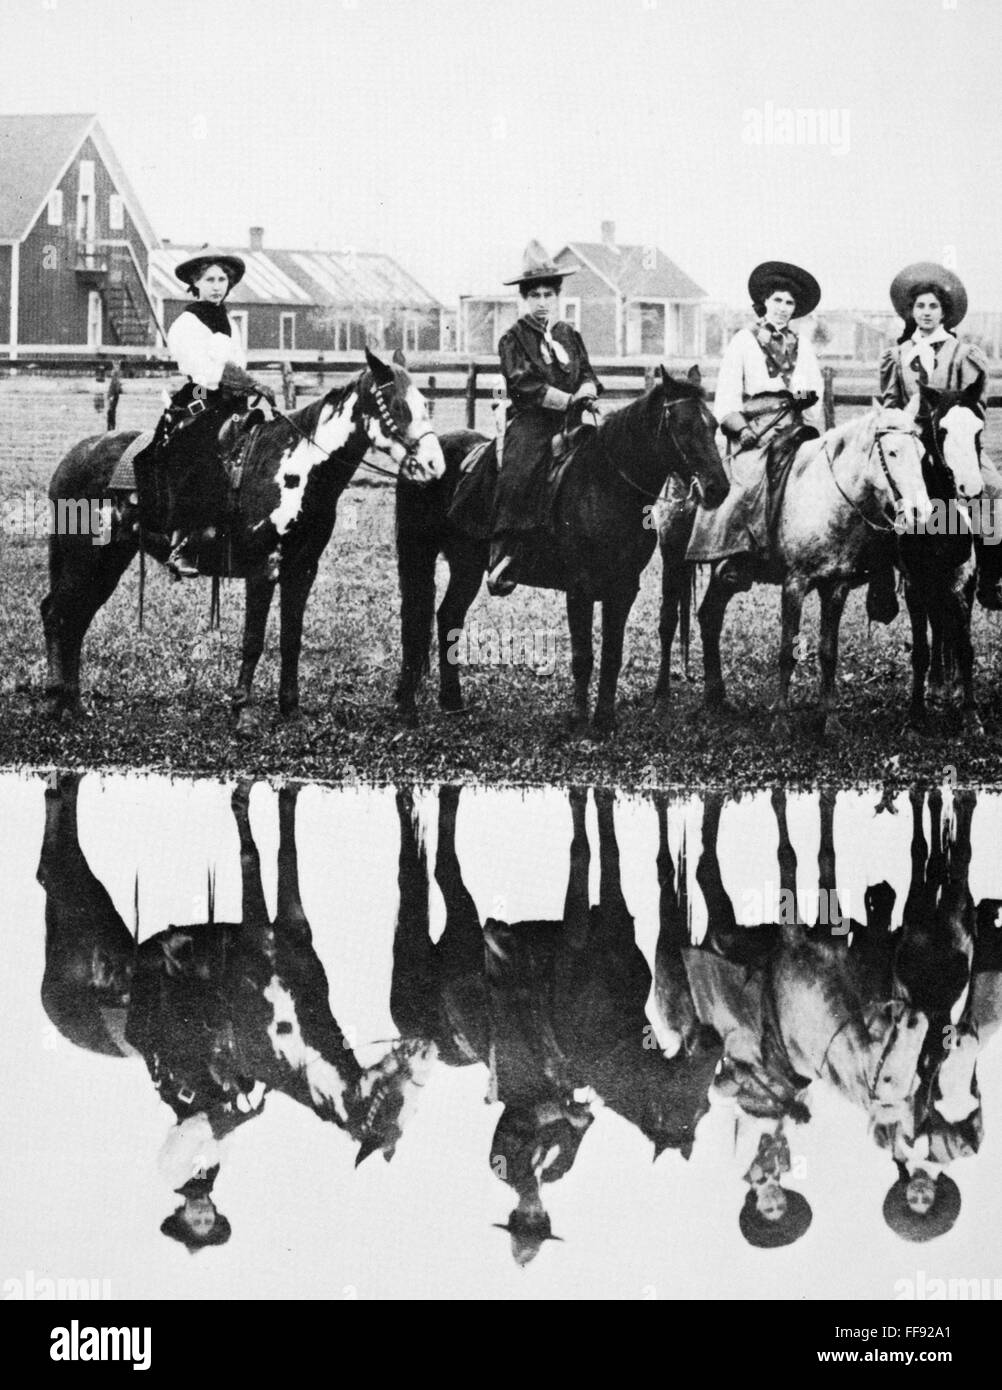 COWGIRLS, 1907. /nCowgirls on an Oklahoma ranch. Photograph, 1907. Stock Photo